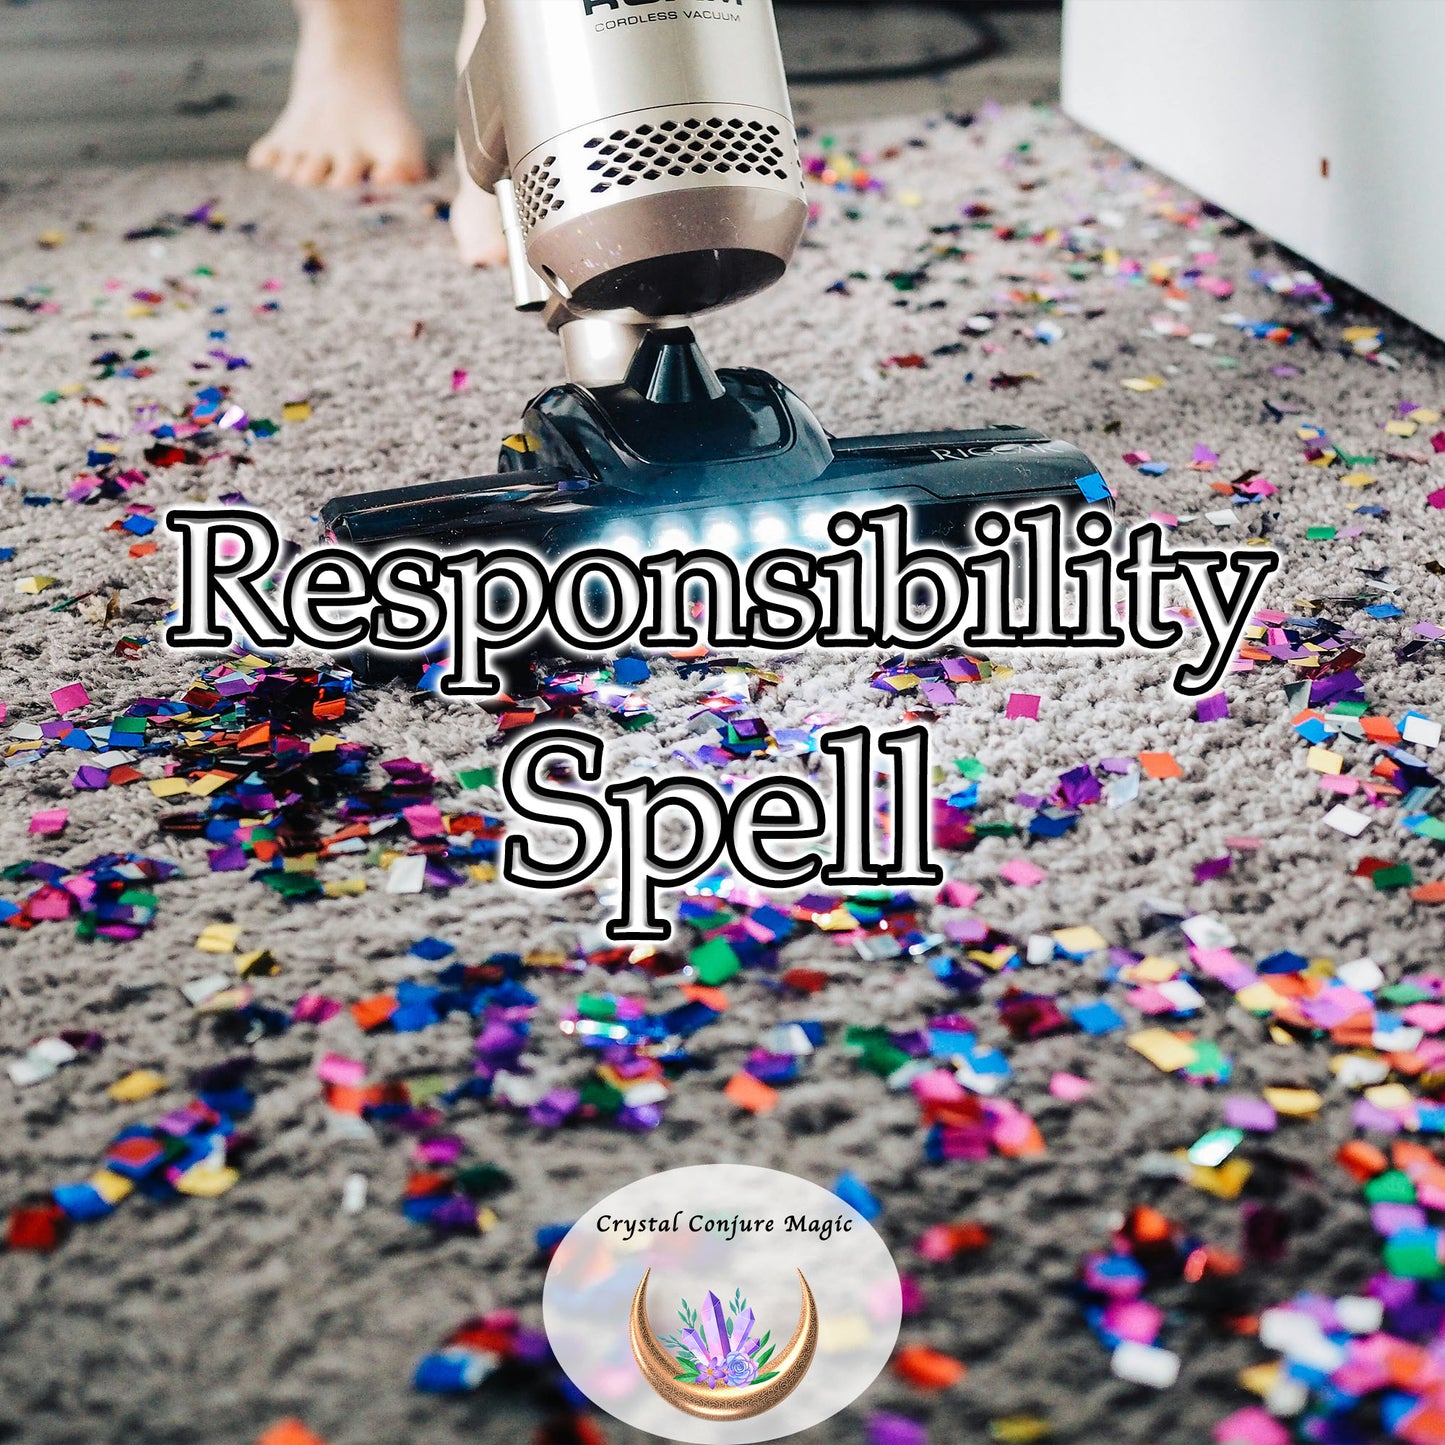 Responsibility Spell - be empowered to meet your responsibilities with a calm, centered approach